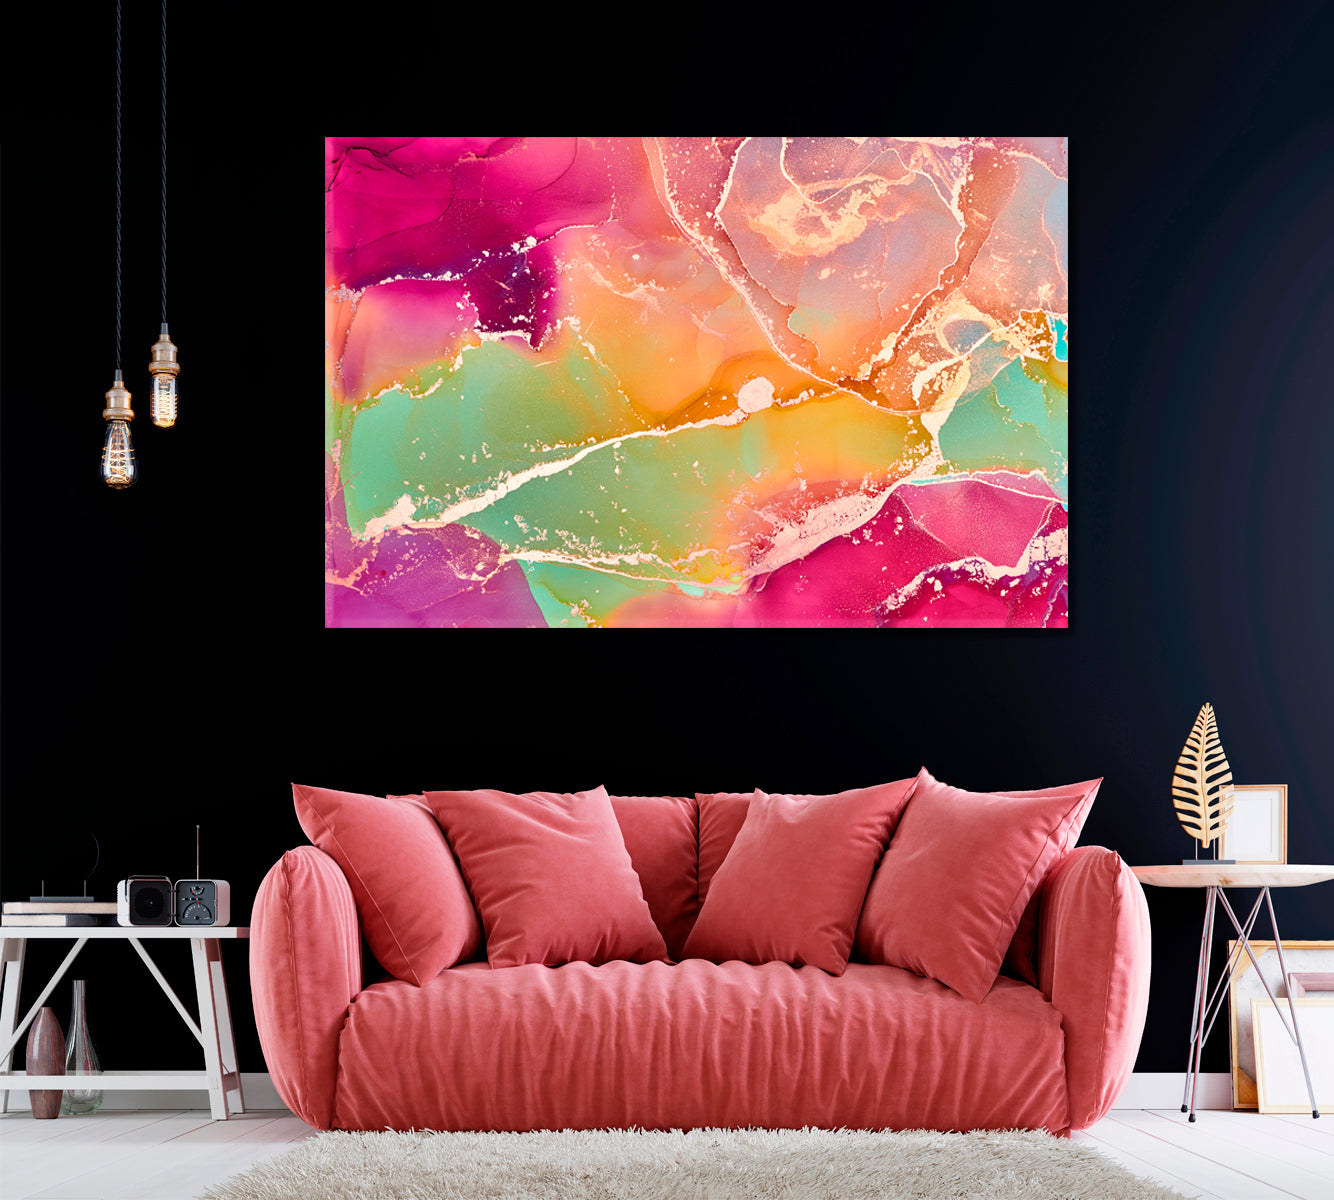 Abstract Liquid Colorful Marble with Veins Canvas Print ArtLexy 1 Panel 24"x16" inches 